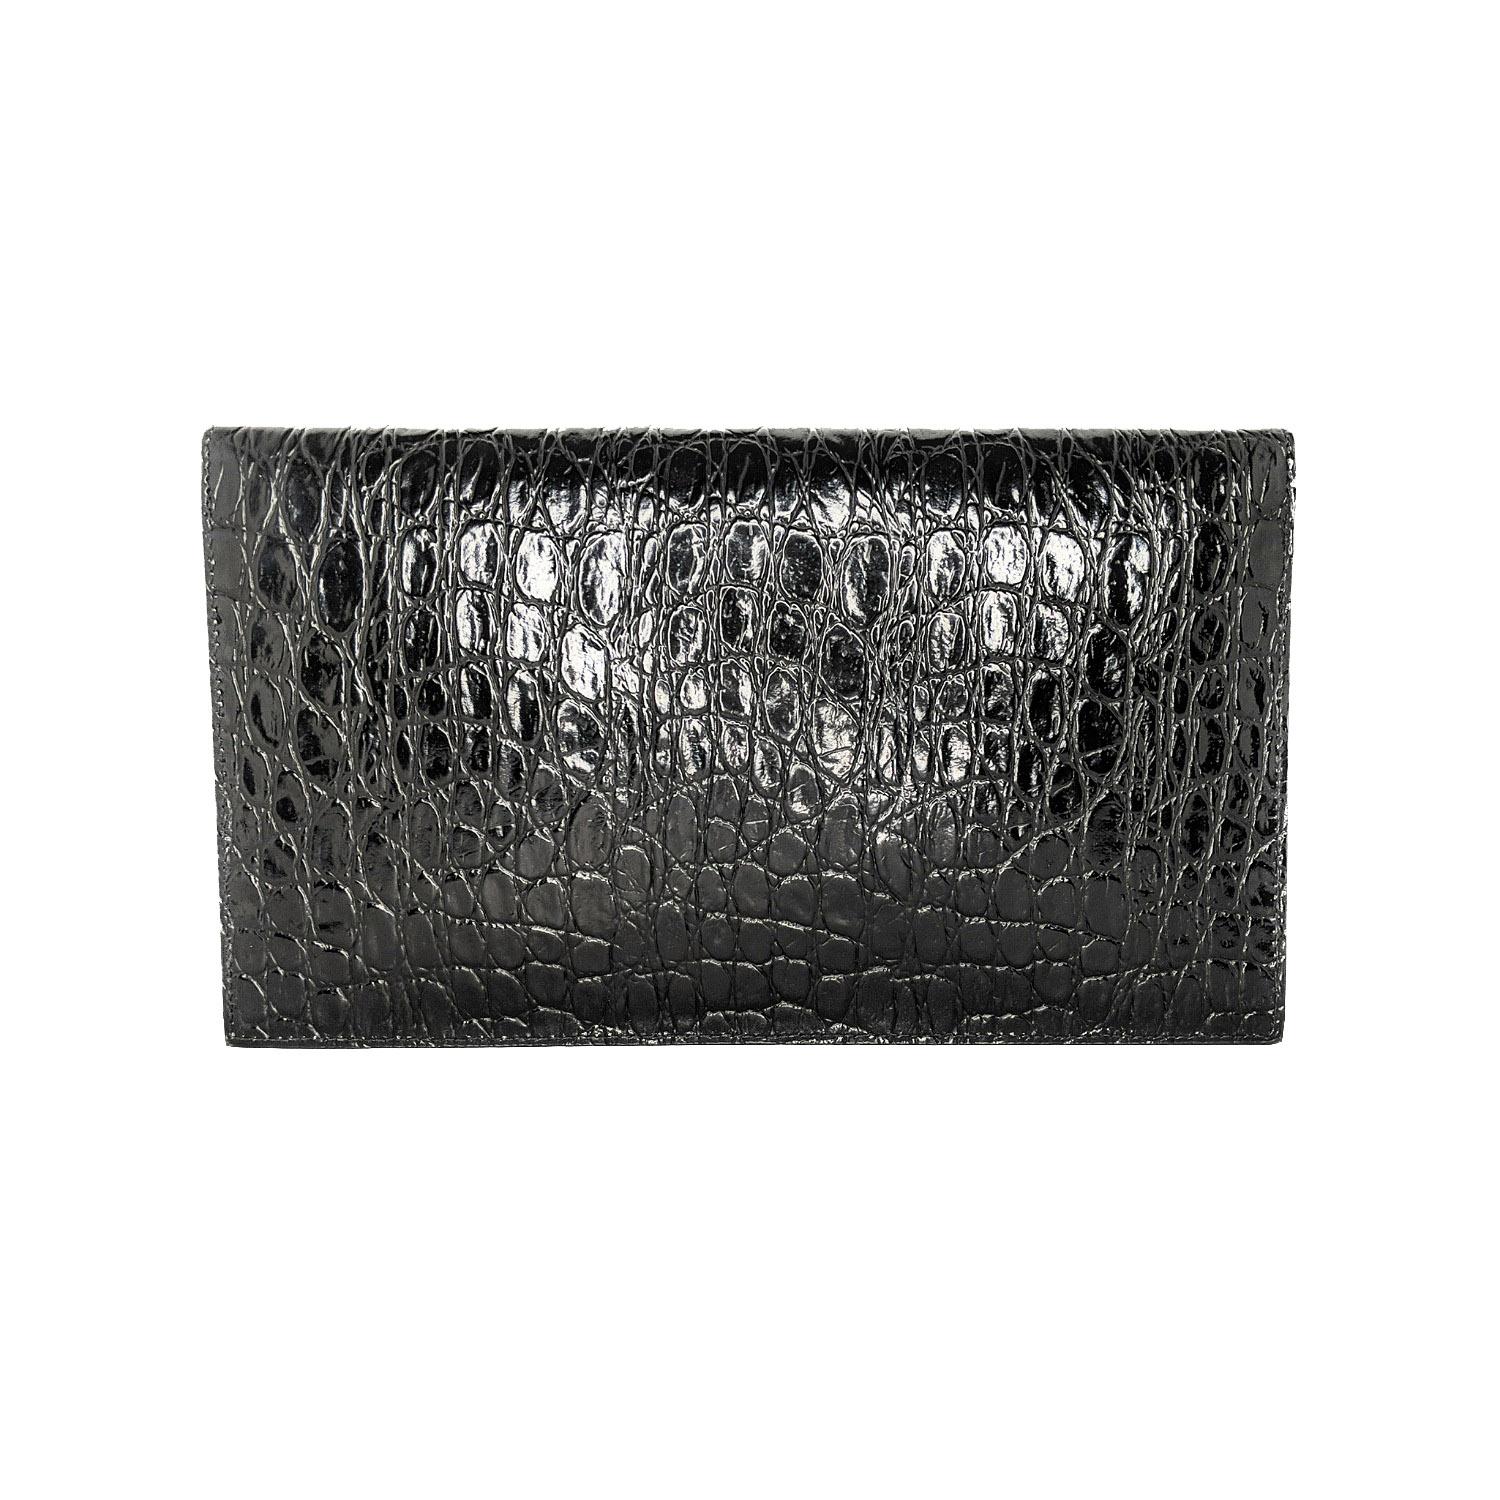 Saint Laurent's 'Uptown' pouch fits everything you need for an evening at a gallery opening or rooftop bar. It's been made in Italy from glossy croc-effect (Calf) leather and decorated with the iconic 'YSL' hardware in gold. Carry it in hand or slip